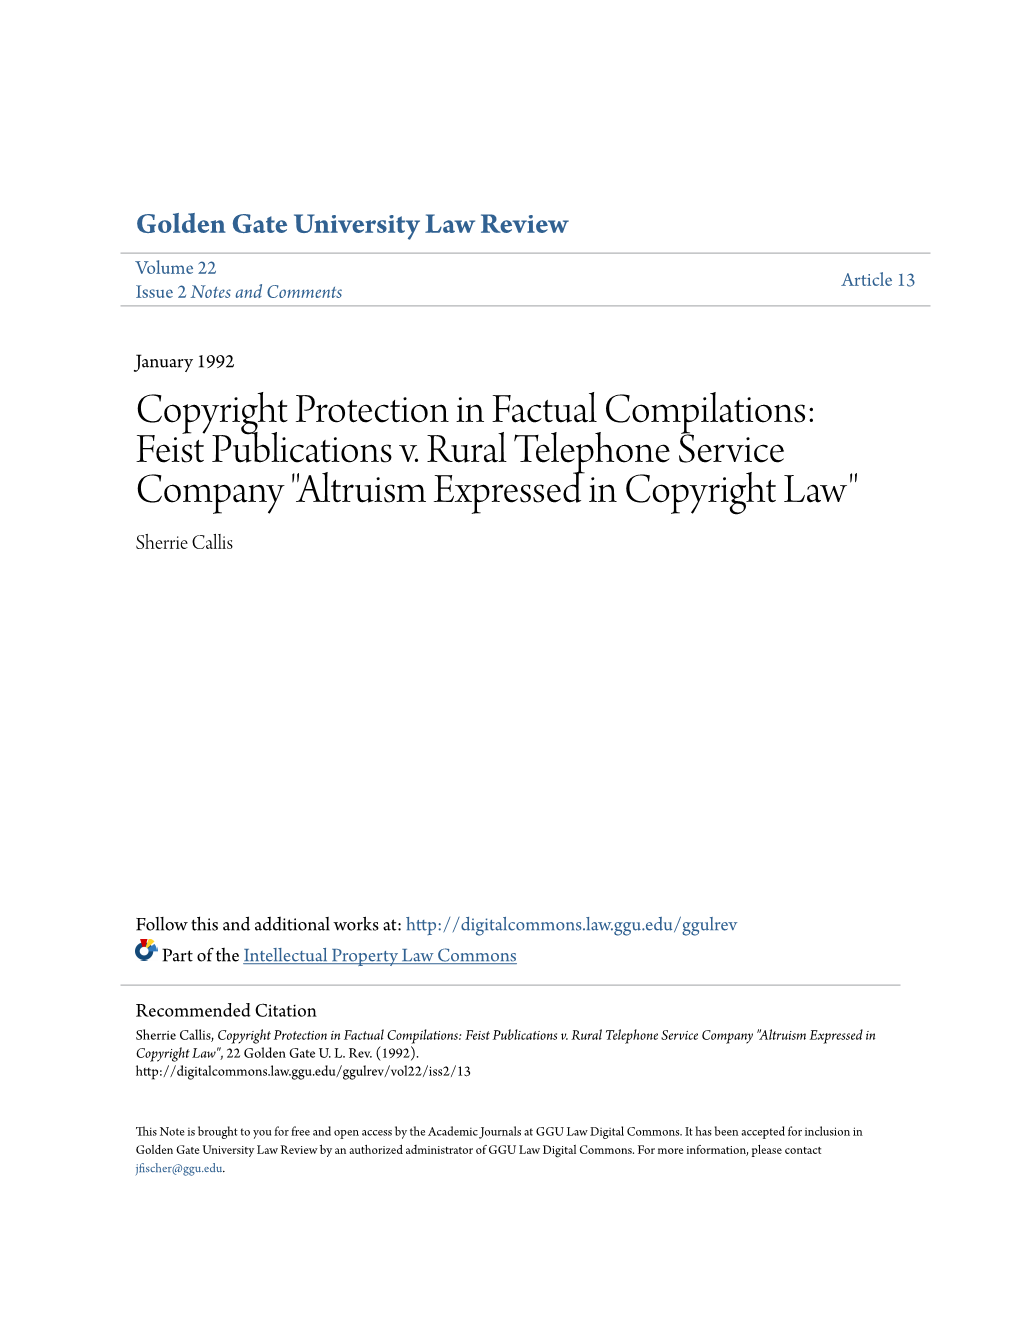 Feist Publications V. Rural Telephone Service Company "Altruism Expressed in Copyright Law" Sherrie Callis